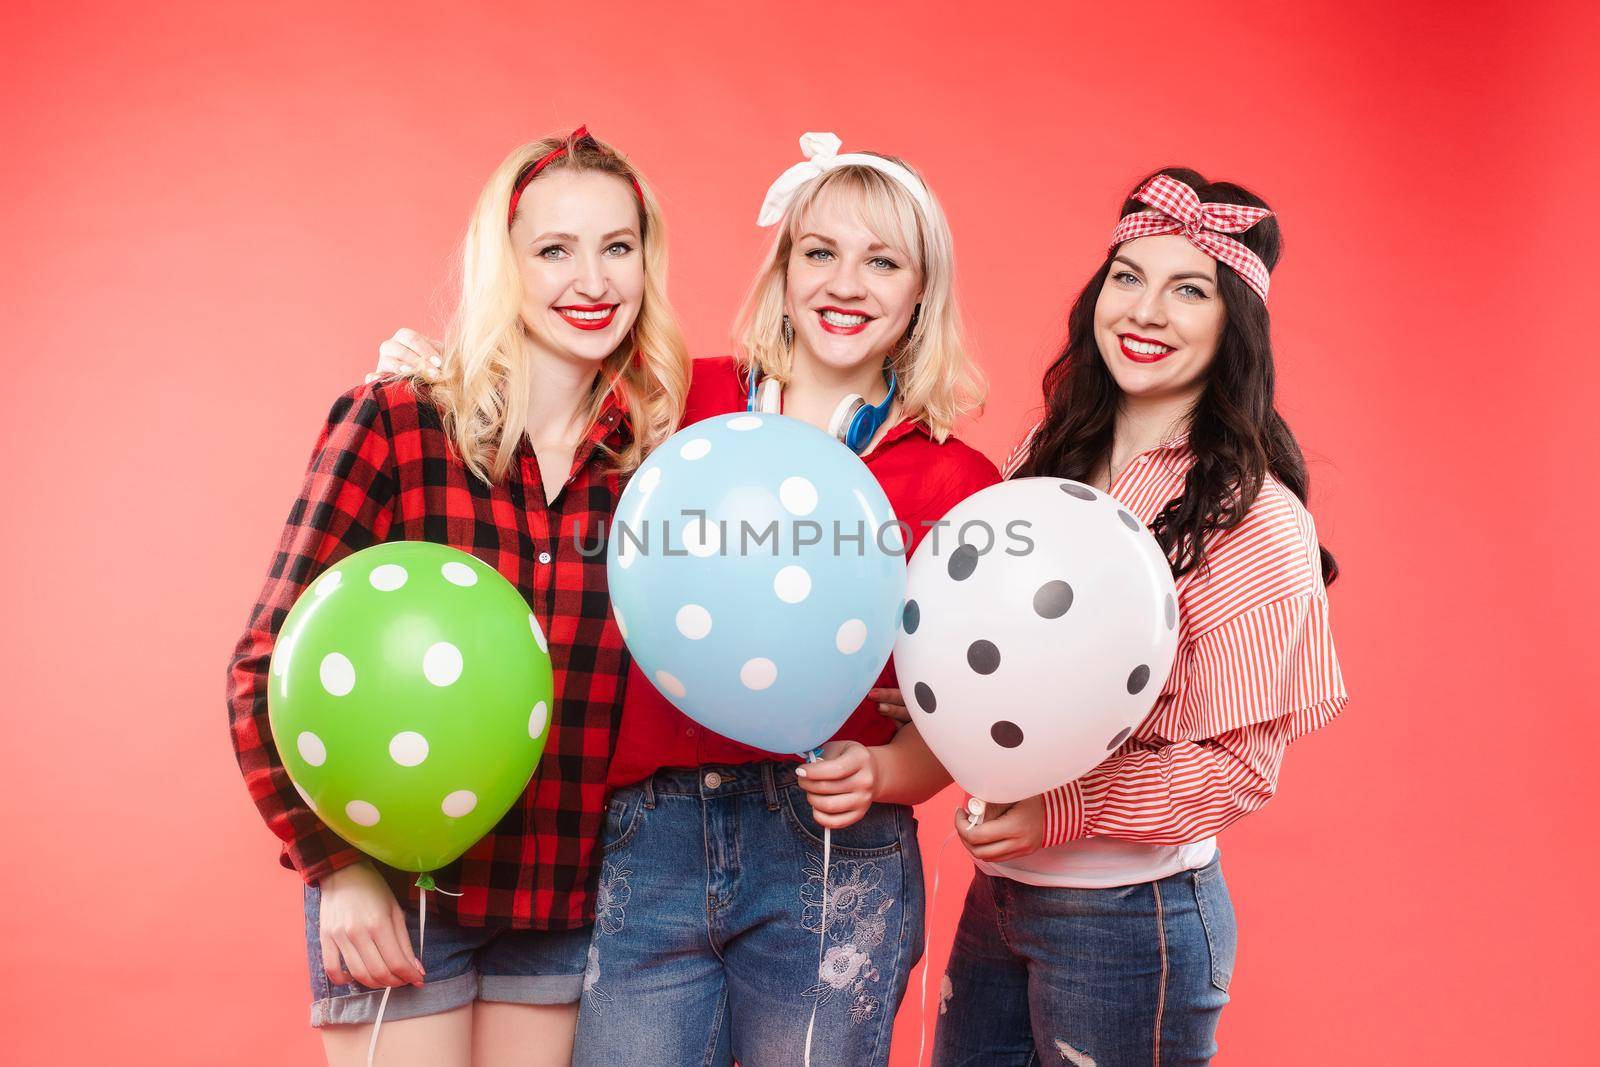 Happy girlfriends with air balloons.Stock photo of three cheerful beautiful and stylish girls hugging and smiling at camera. They are holding colorful dotted air balloons. Isolate on red background. by StudioLucky